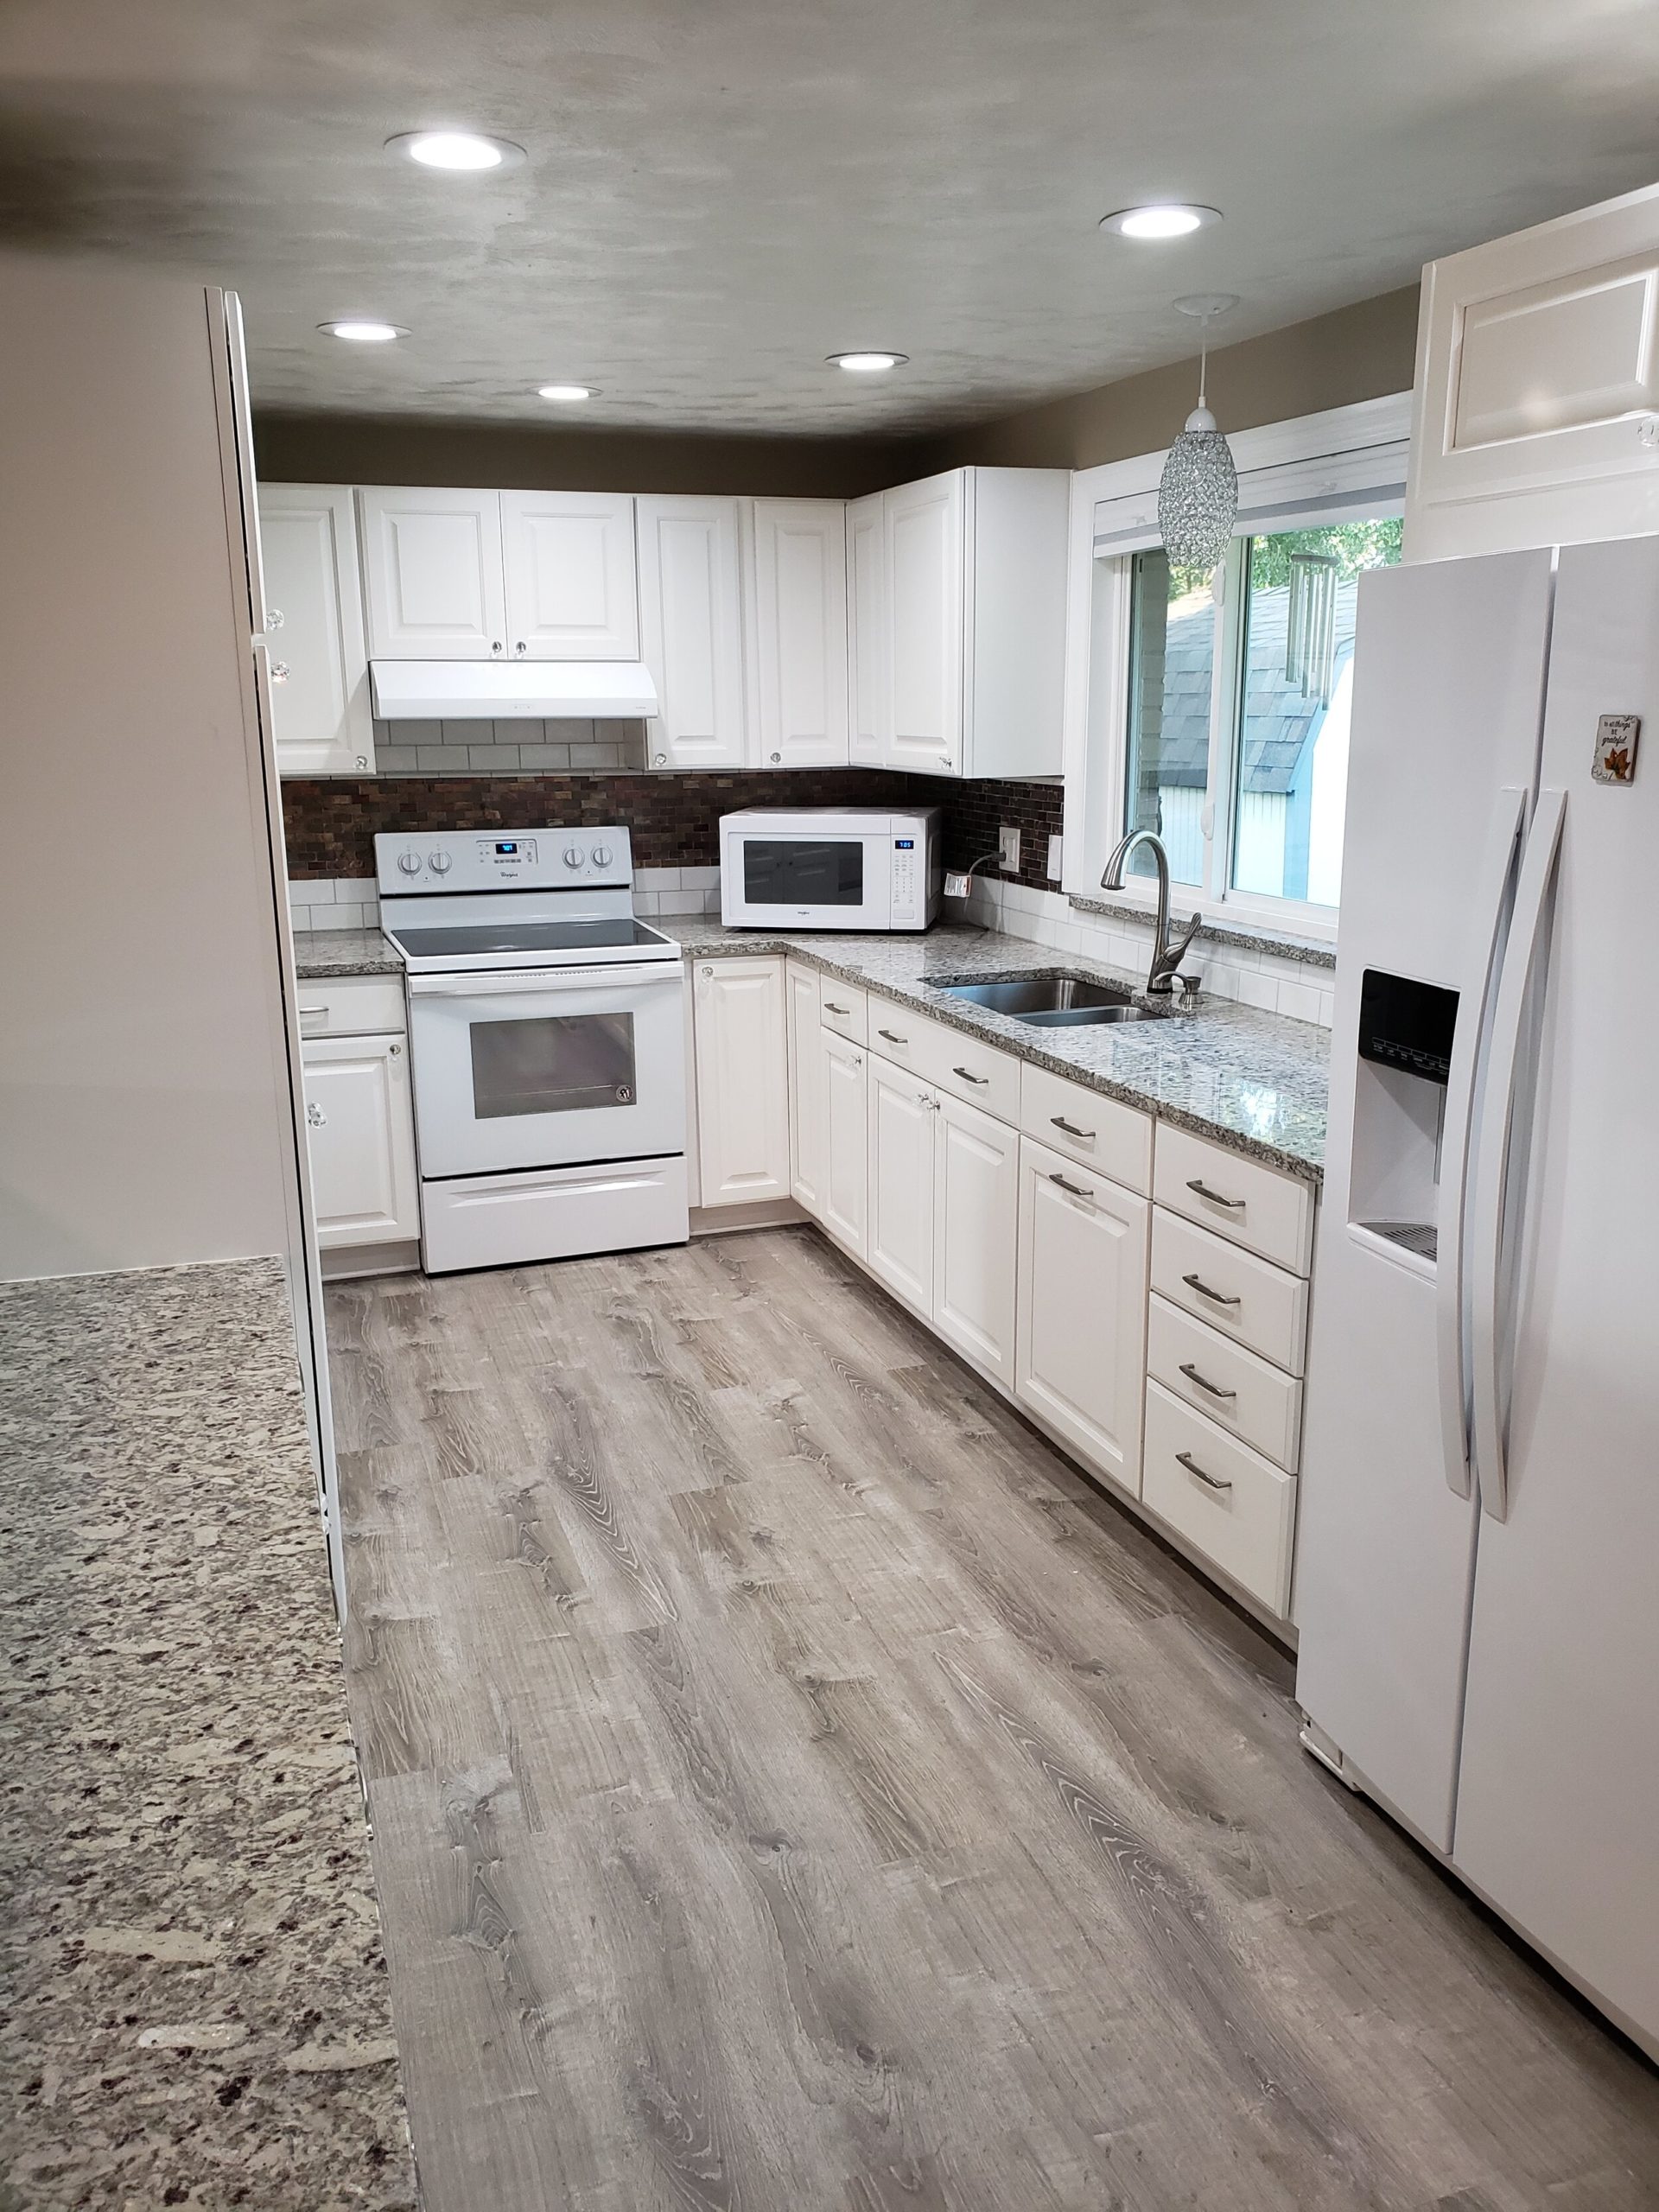 Kitchen with white cabinets and gray countertops